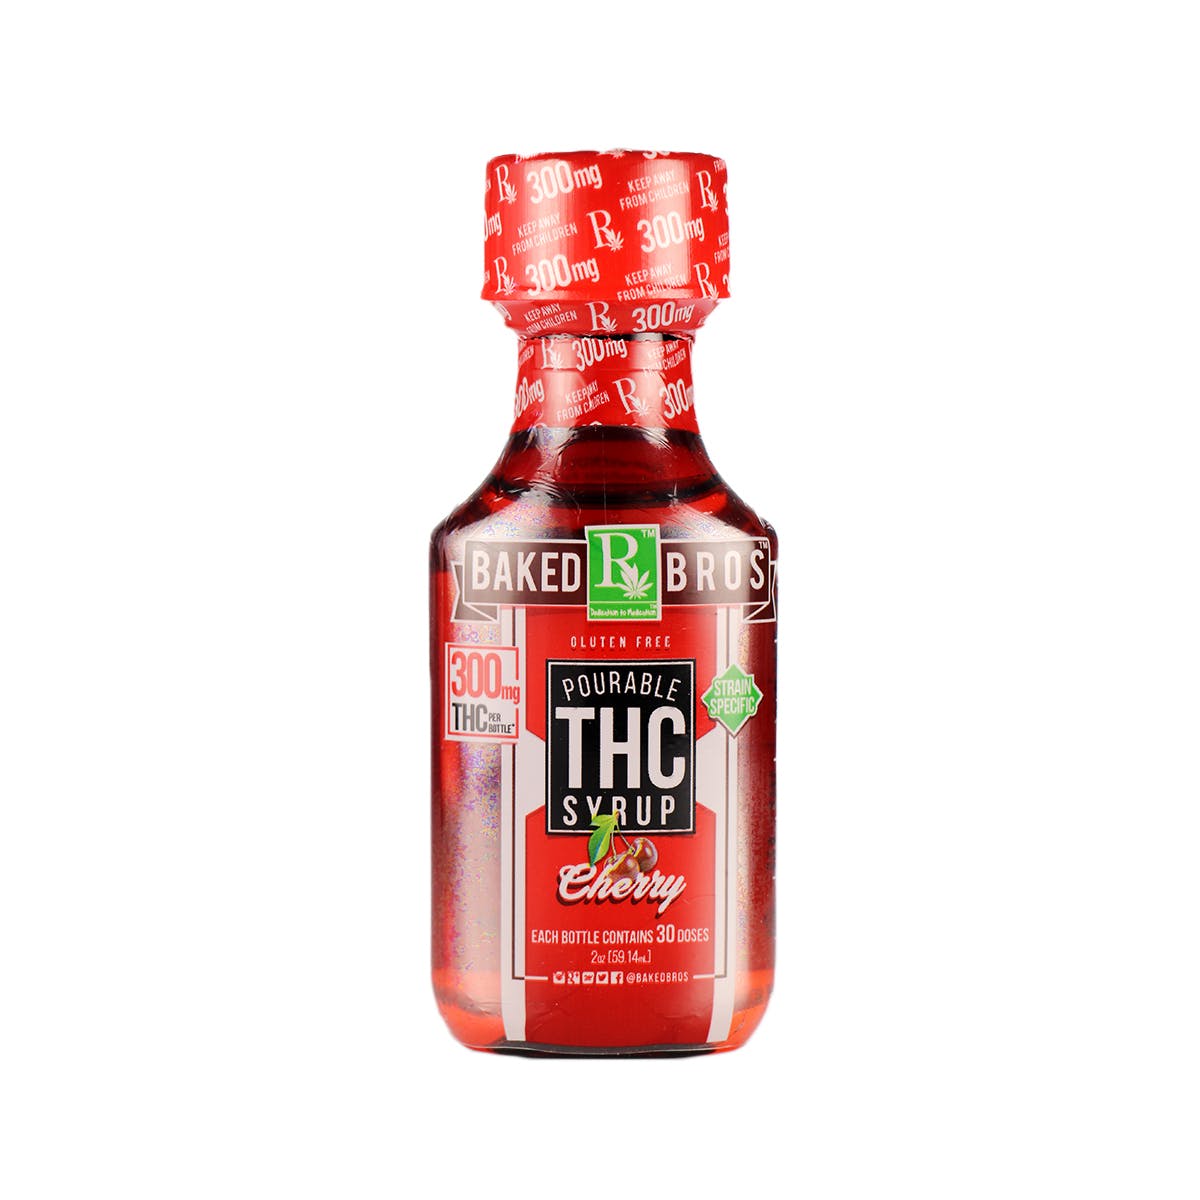 edible-baked-bros-thc-syrup-cherry-300mg